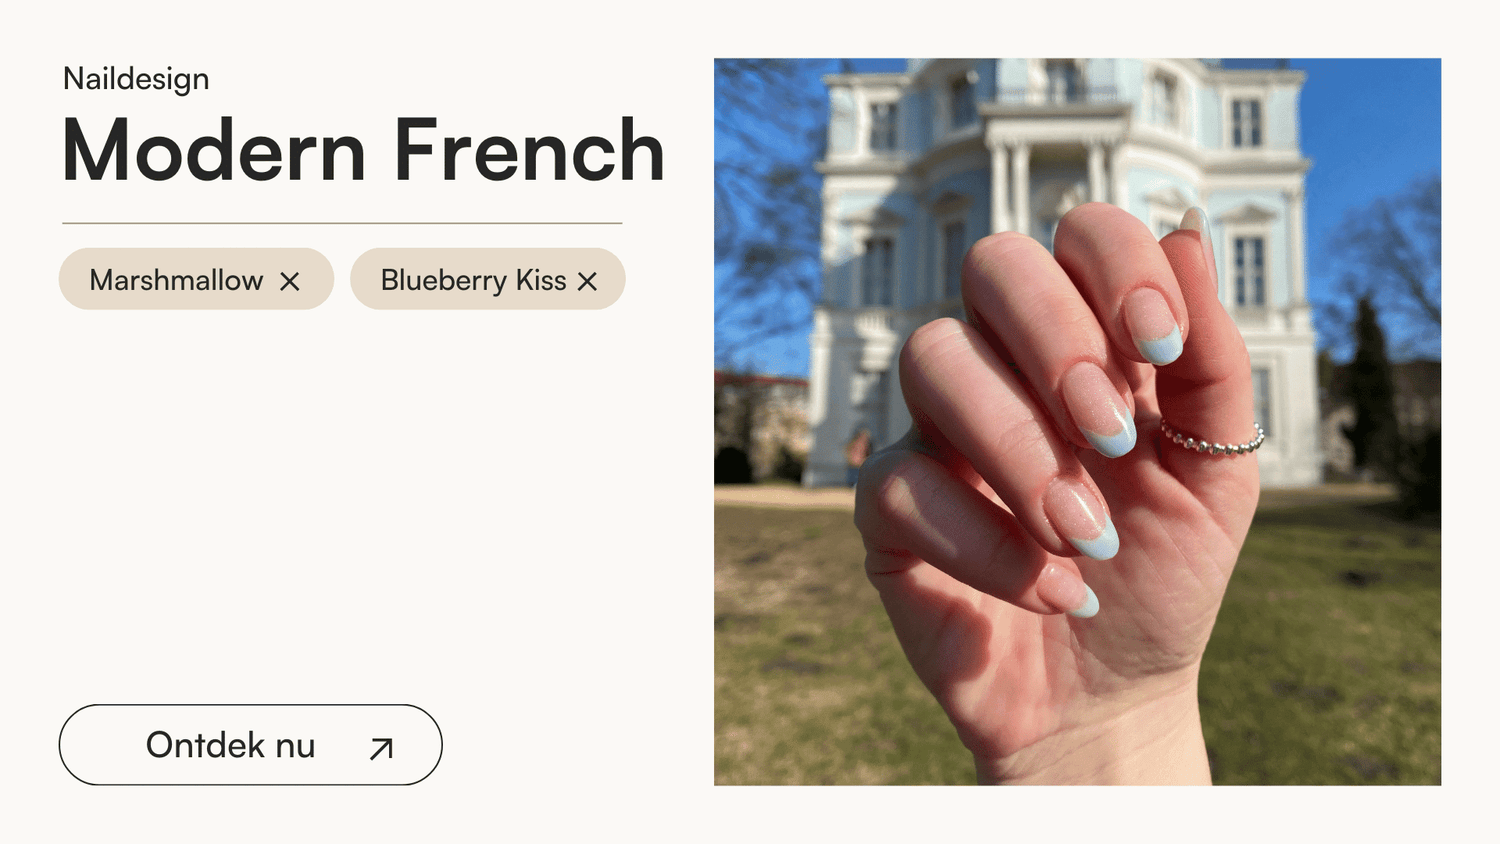 Modern French met Blueberry Kiss